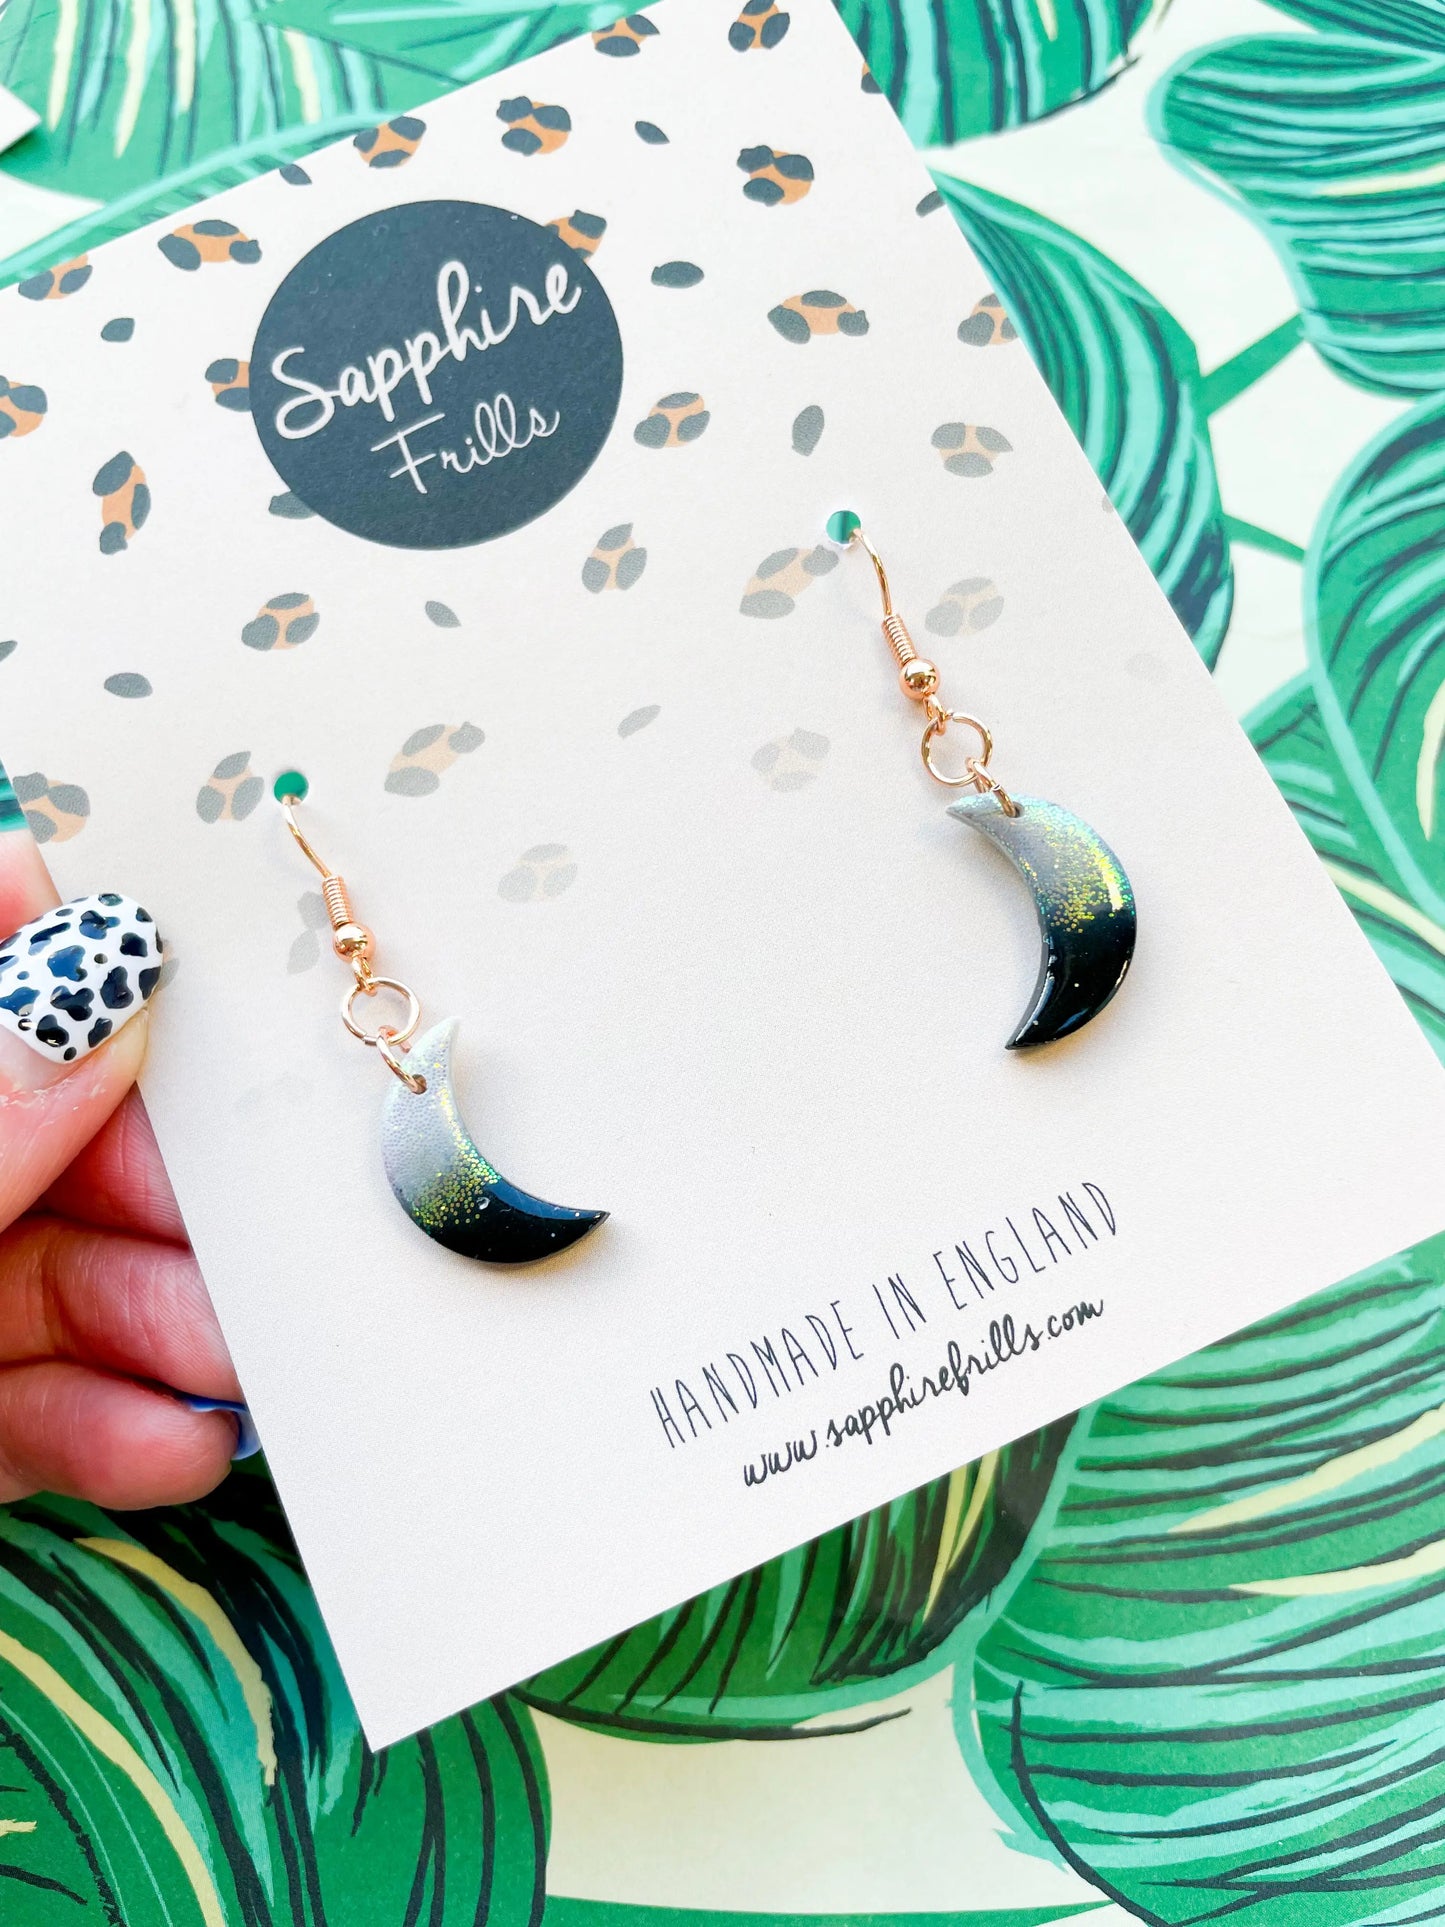 Medium Florescent White Glitter and Black Ombre Moon Earrings from Sapphire Frills